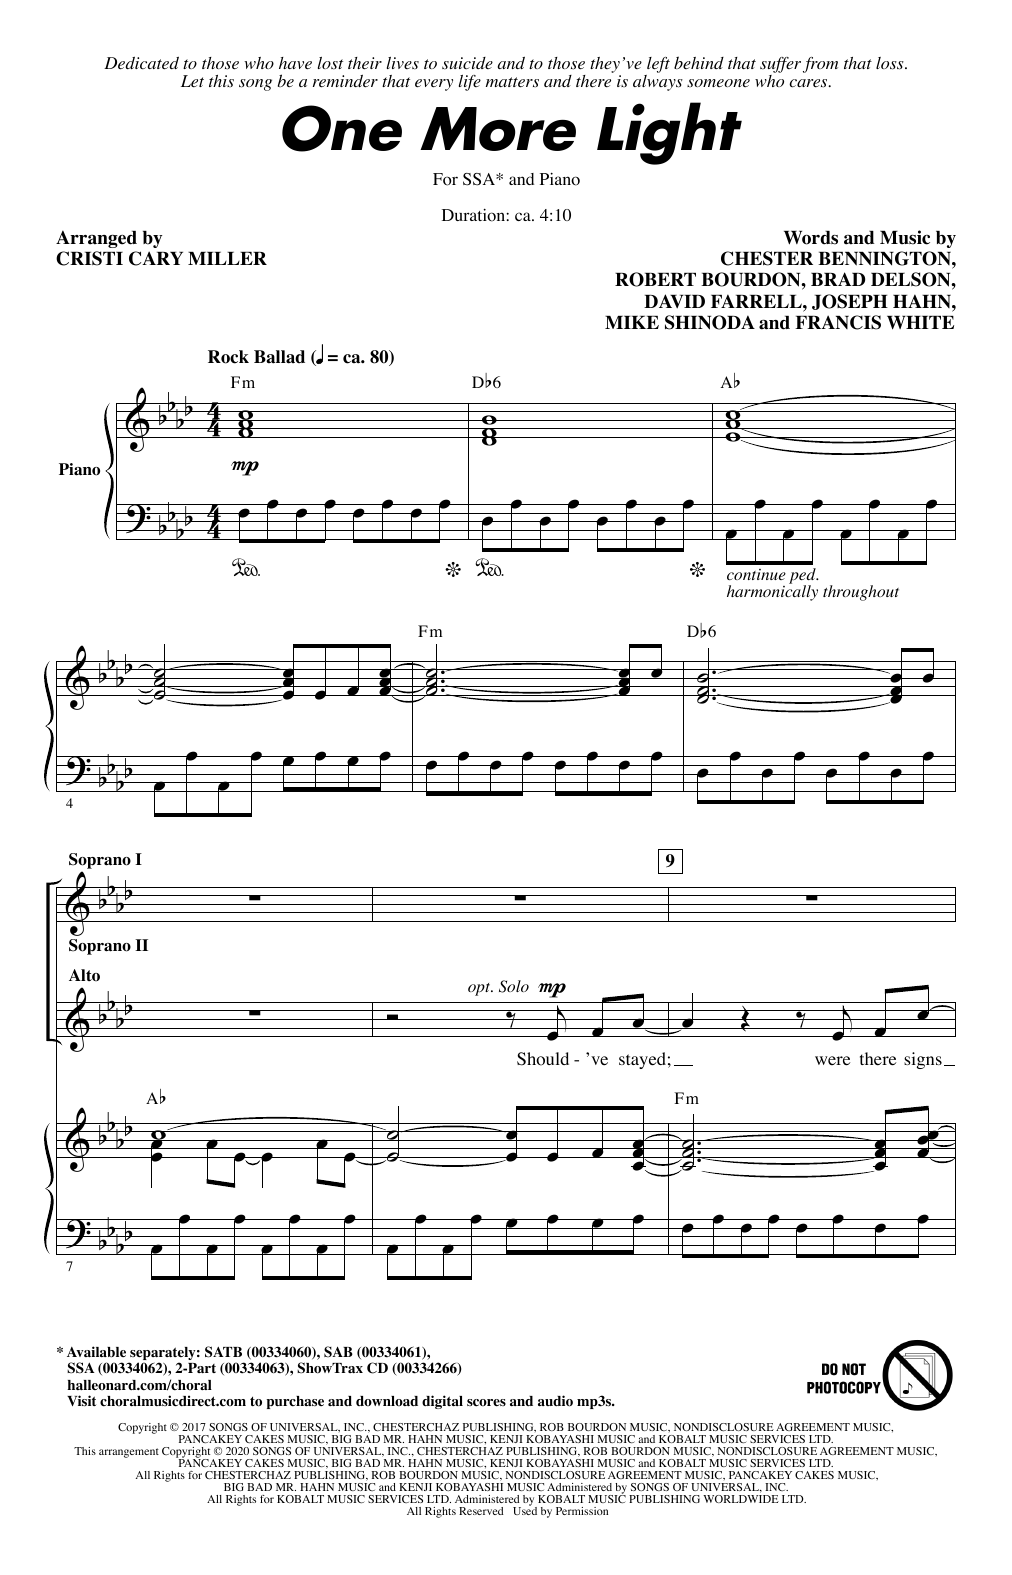 Park "One More Light (arr. Cristi Cary Miller)" Sheet Music Notes, Chords | Download Printable Score